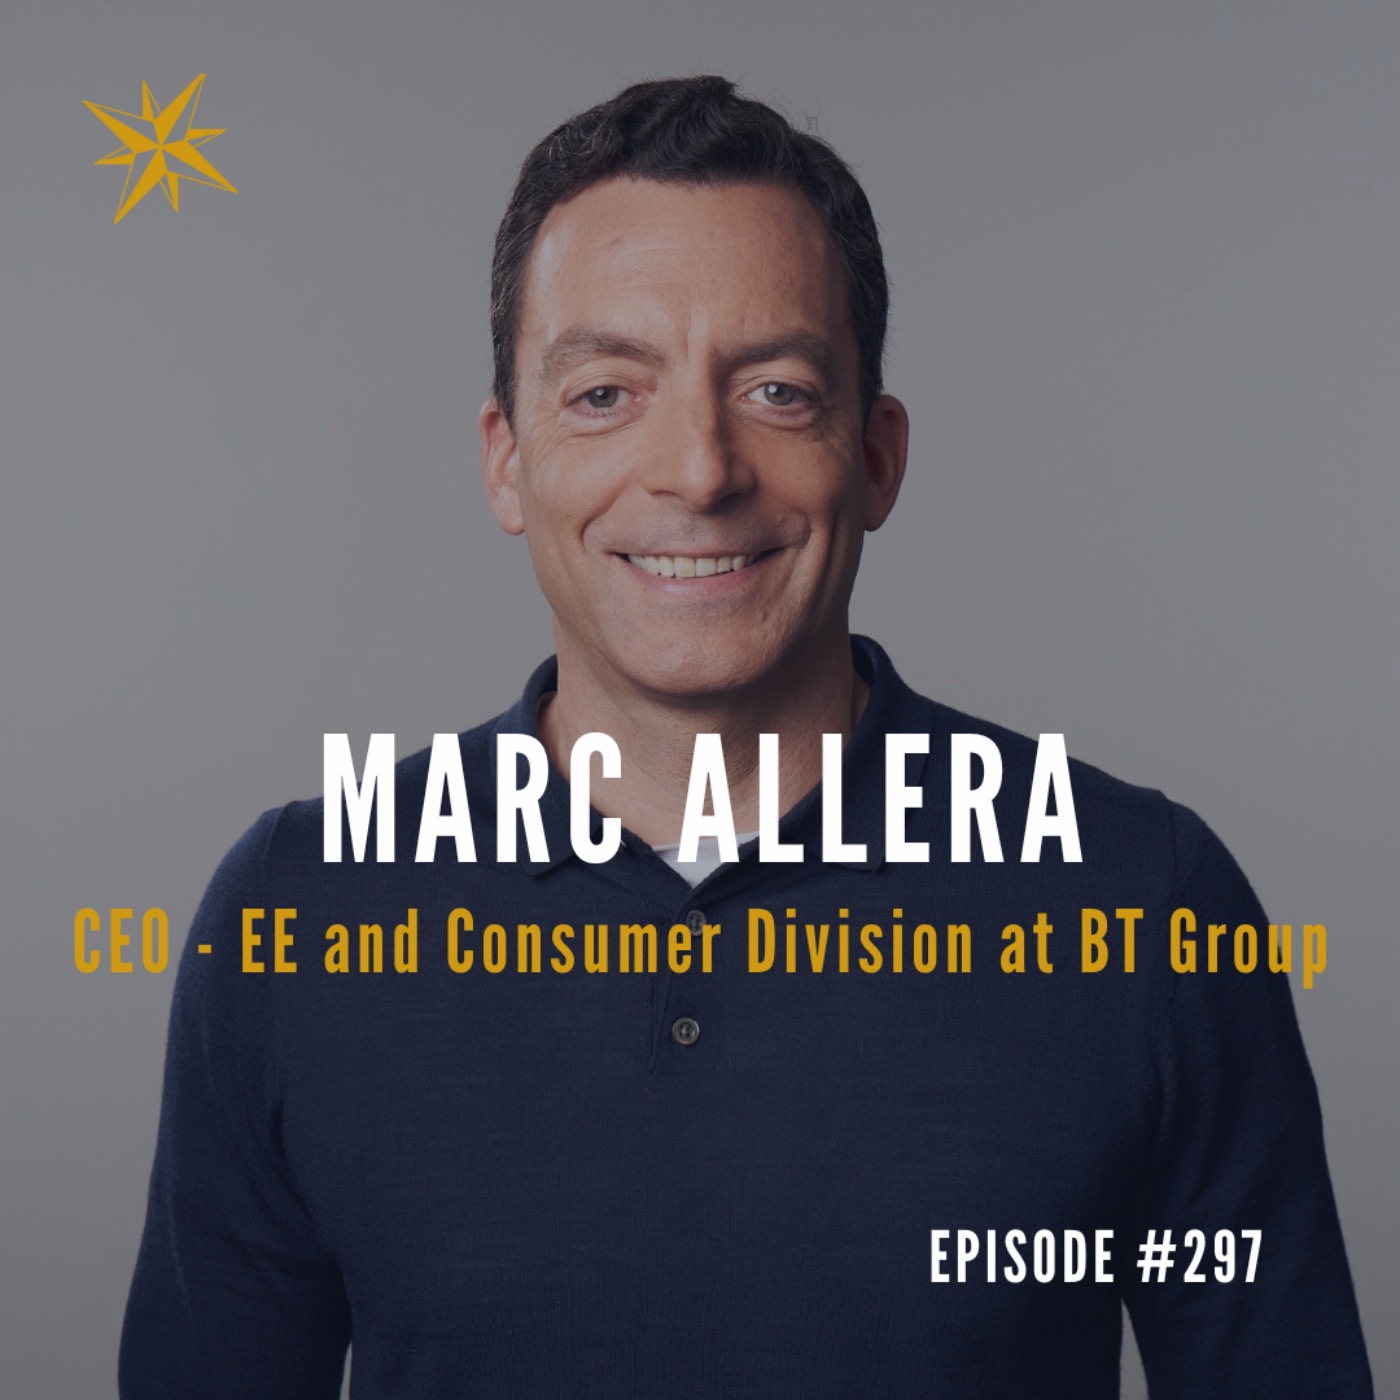 #297: Marc Allera: CEO - EE and Consumer Division at BT Group